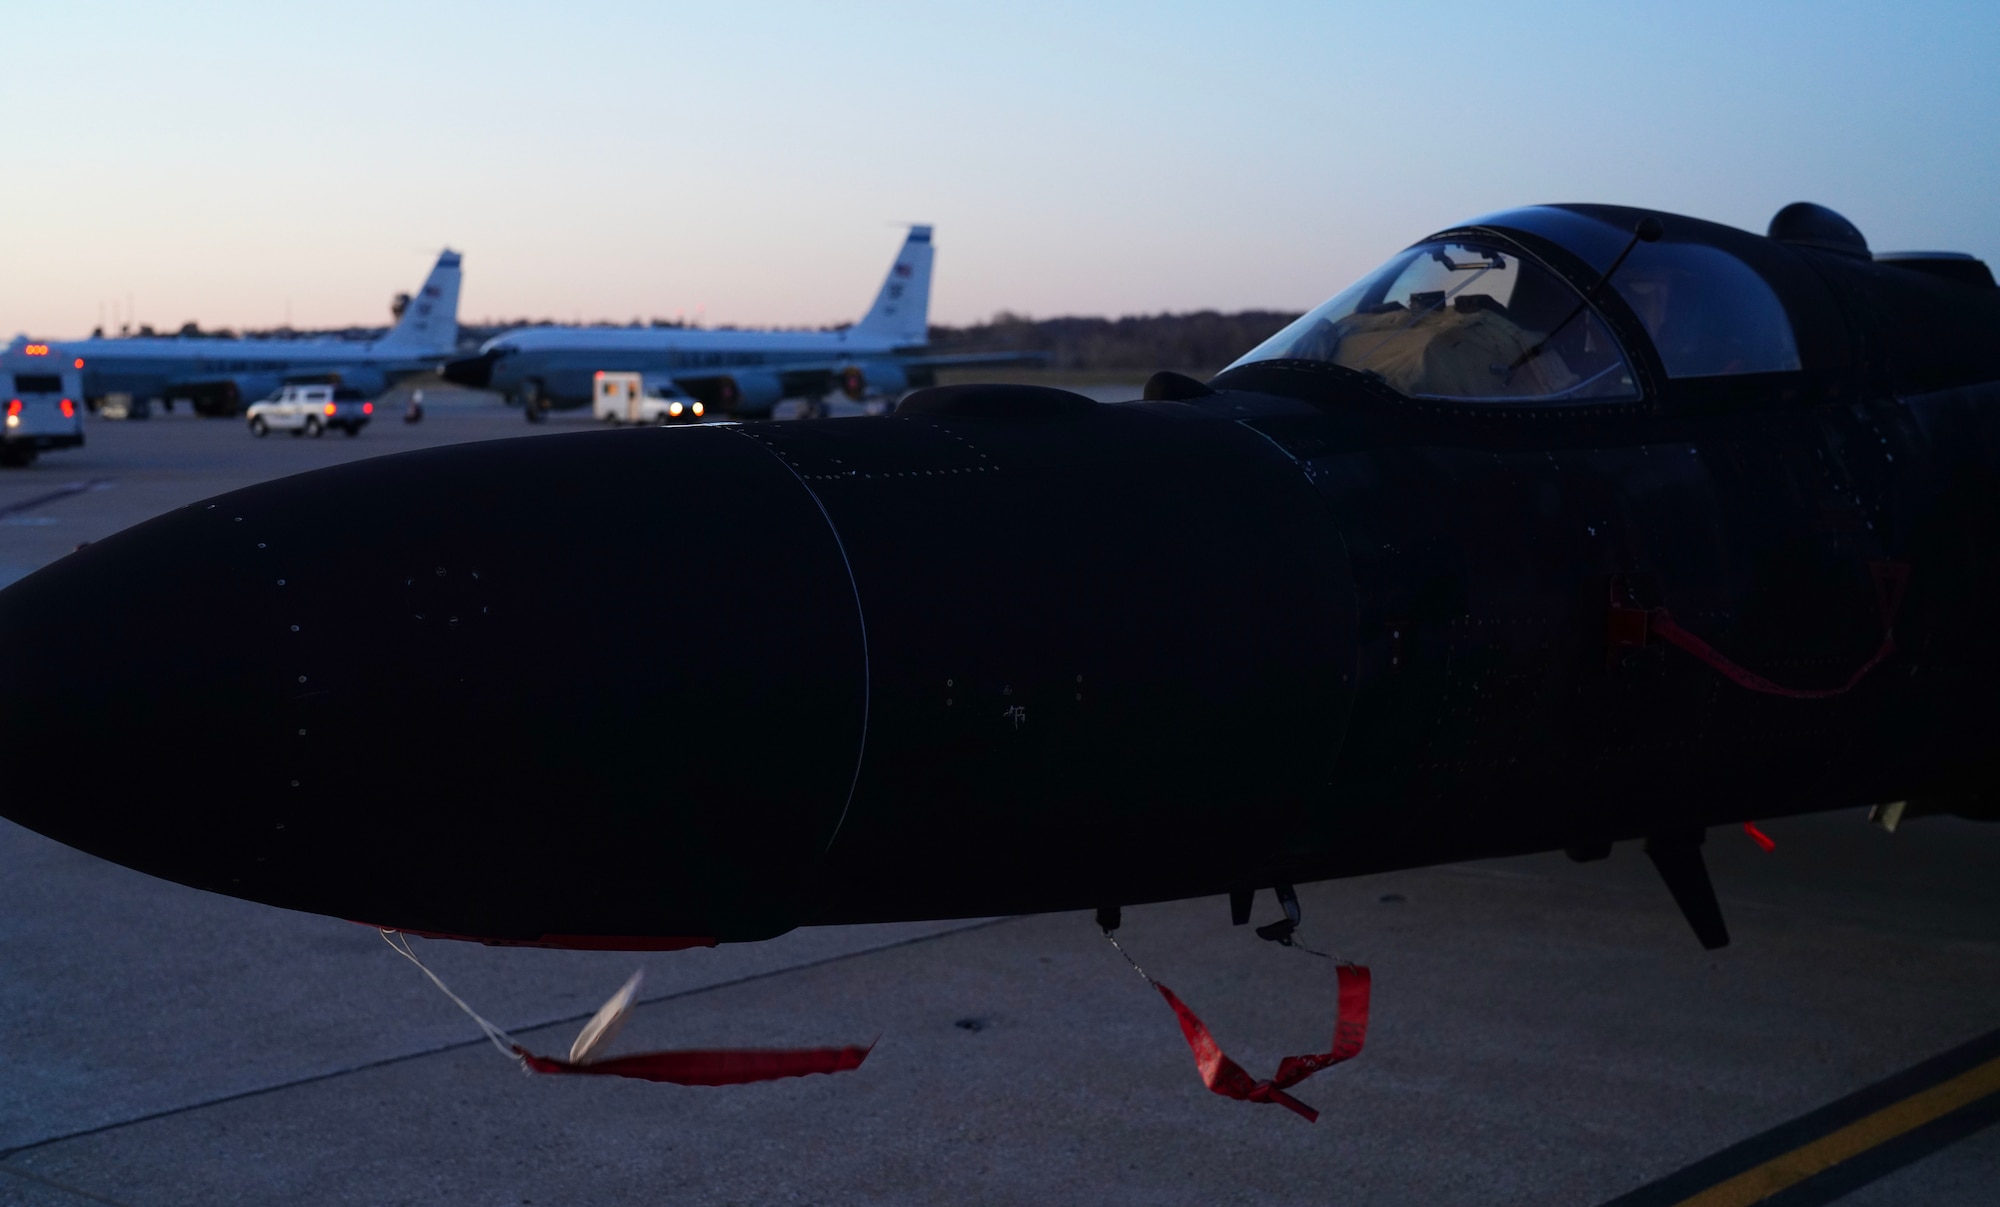 A U.S. Air Force 9th Reconnaissance Wing U-2 Dragon Lady is photographed on the base flightline after a sortie during Dragon Flag EAST, April 5, 2023, at Offutt Air Force Base, Nebraska.